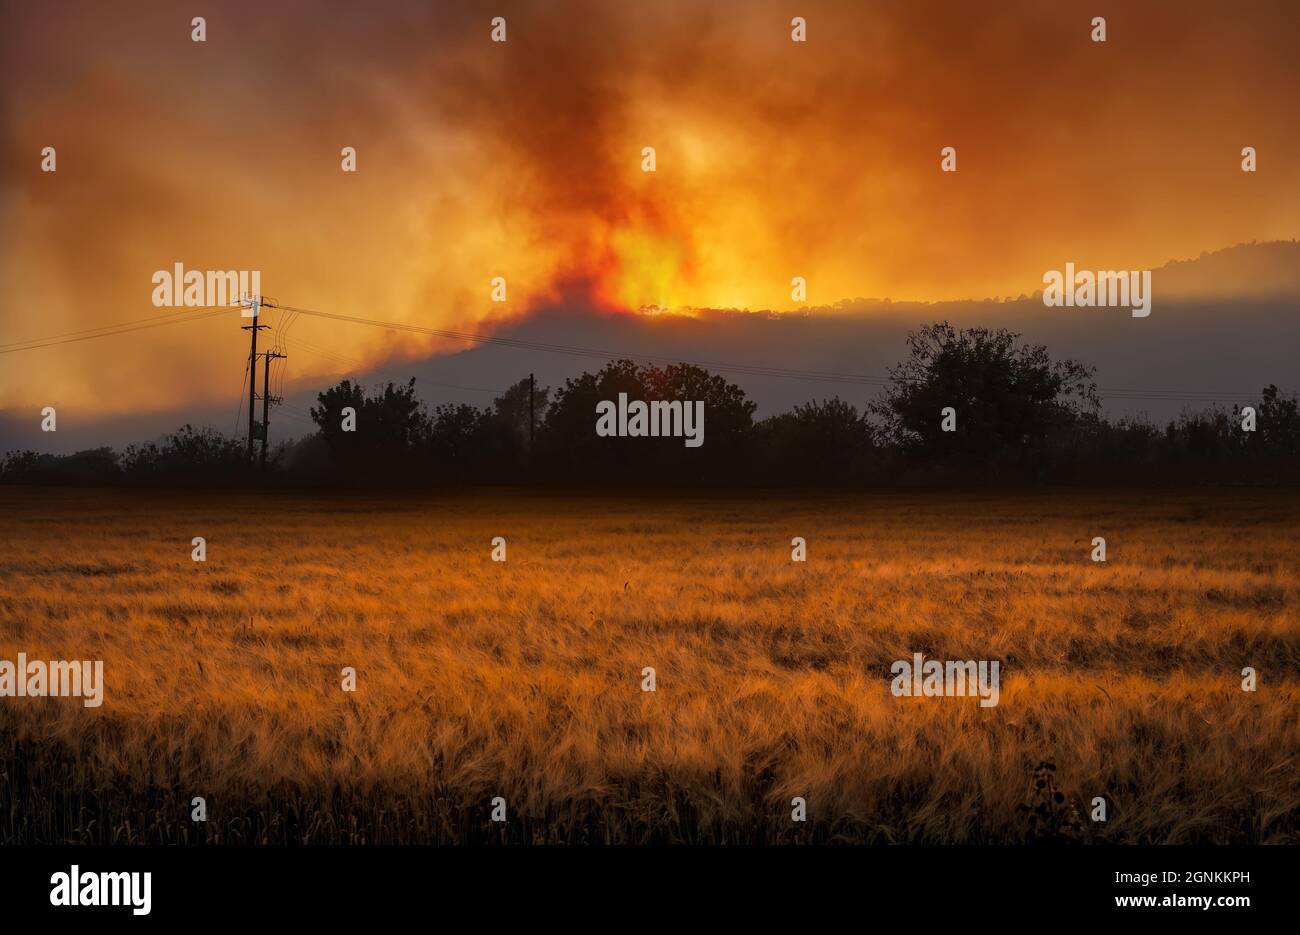 Rural landscape with dramatic wildfire at night and field of wheat on the foreground Stock Photo